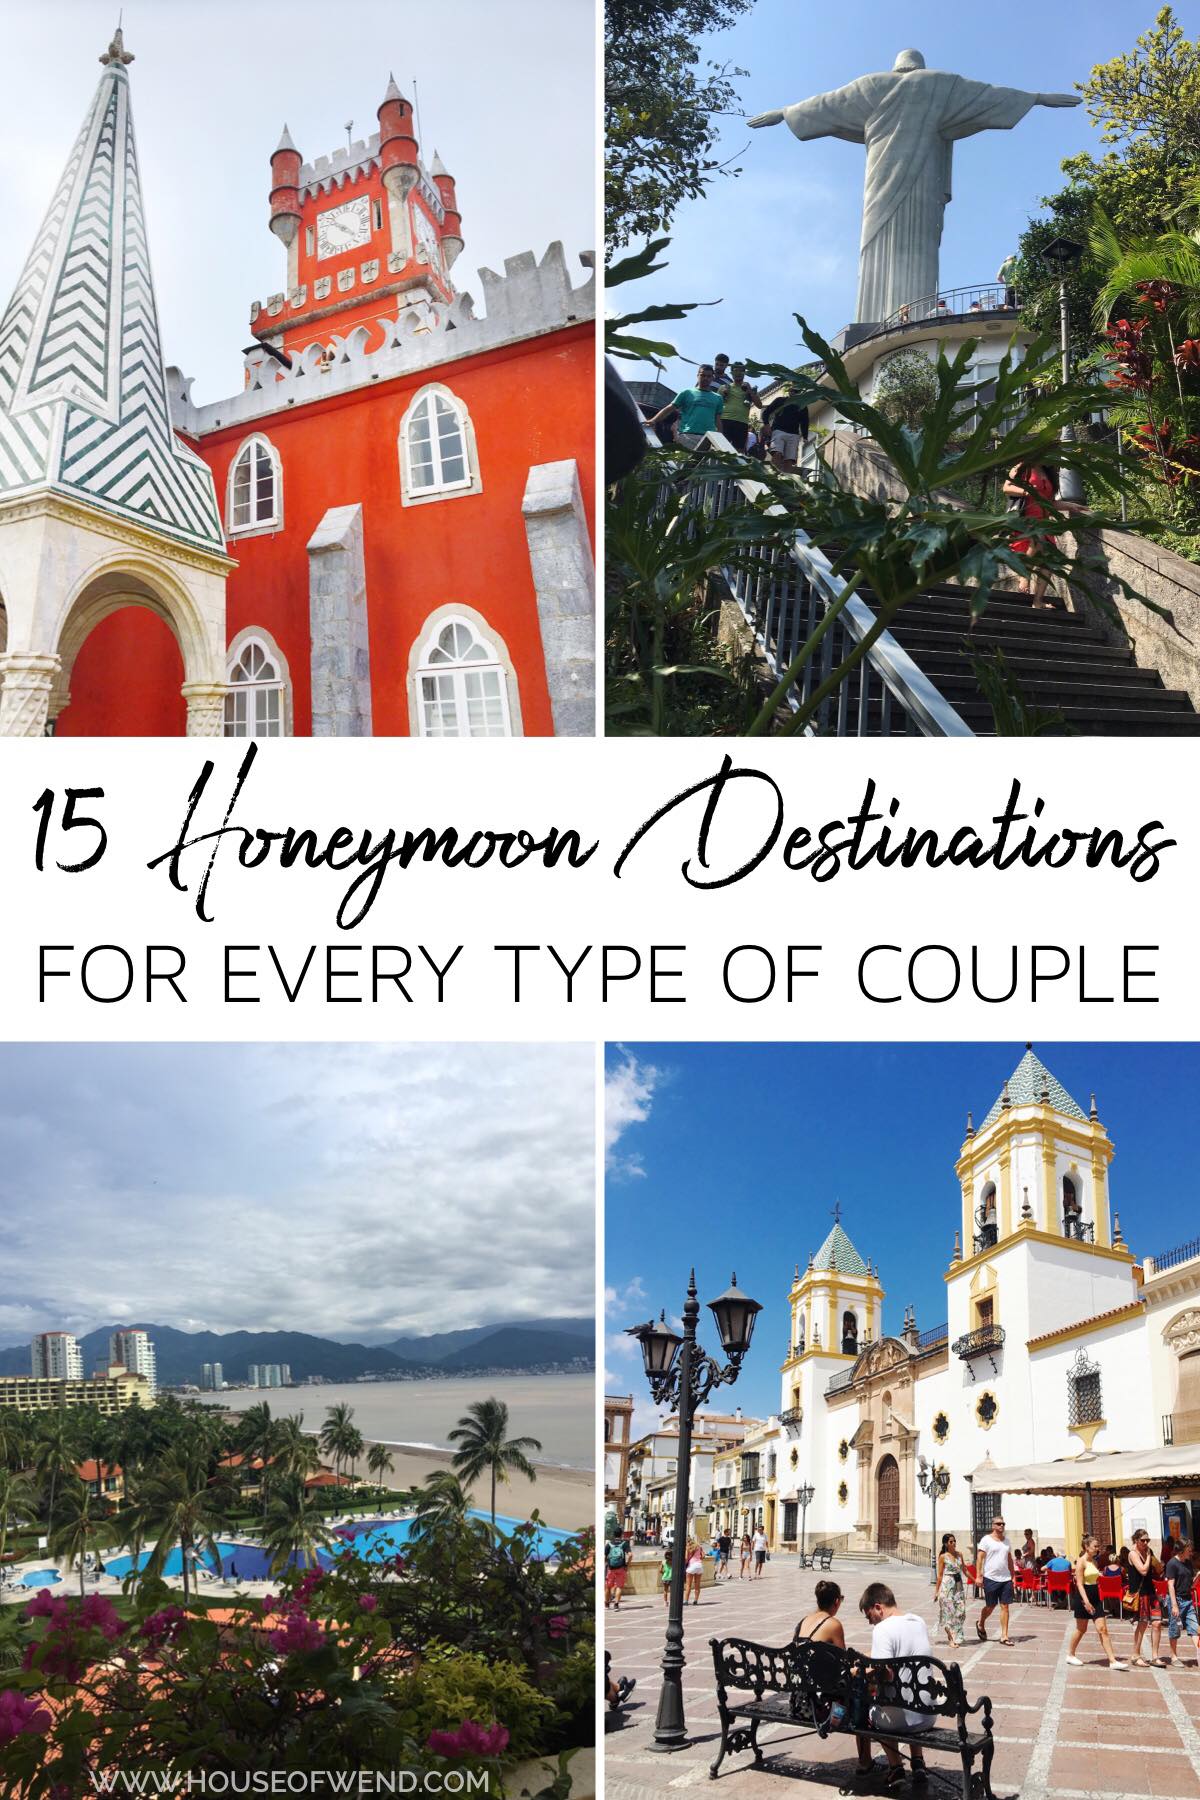 Honeymoon Destinations for Every Type of Couple